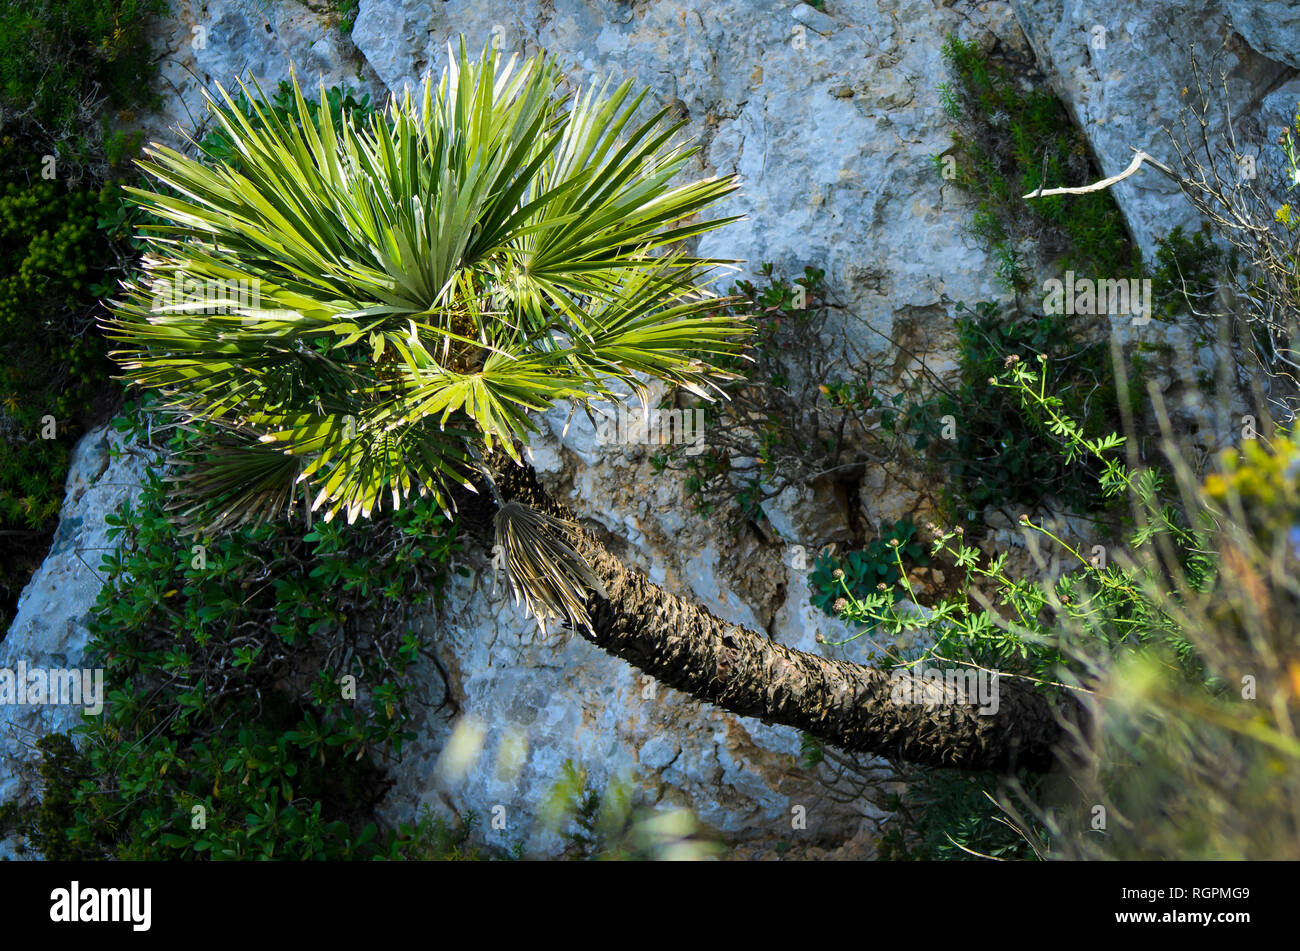 Chamaerops humilis, in the palm family Arecaceae, variously called European fan palm, or the Mediterranean dwarf palm, growing on a rocky cliff side. Stock Photo